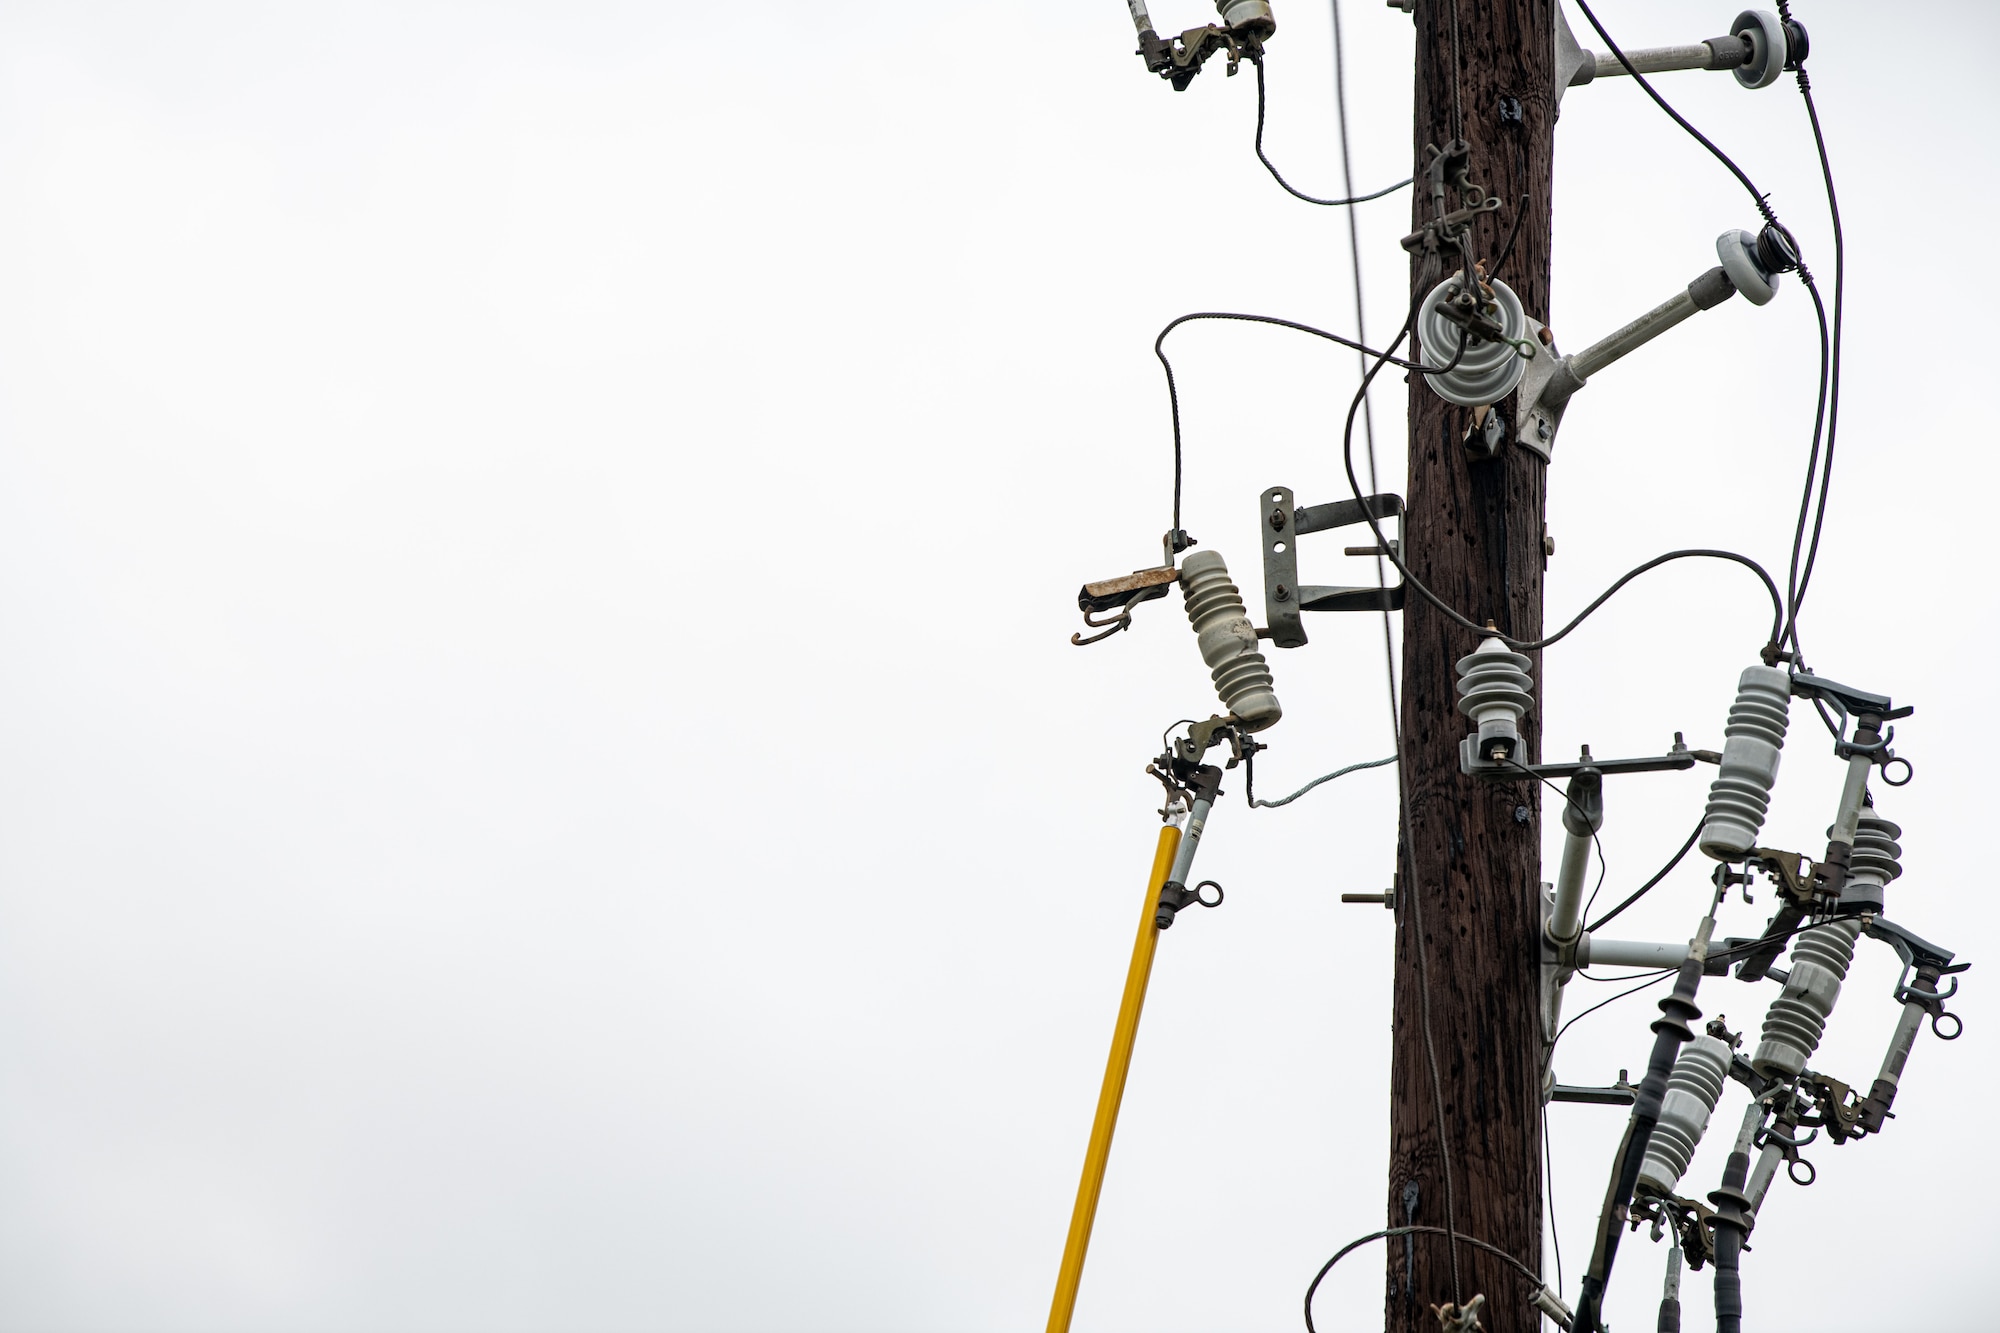 An Airman replaces a fuse on a power line